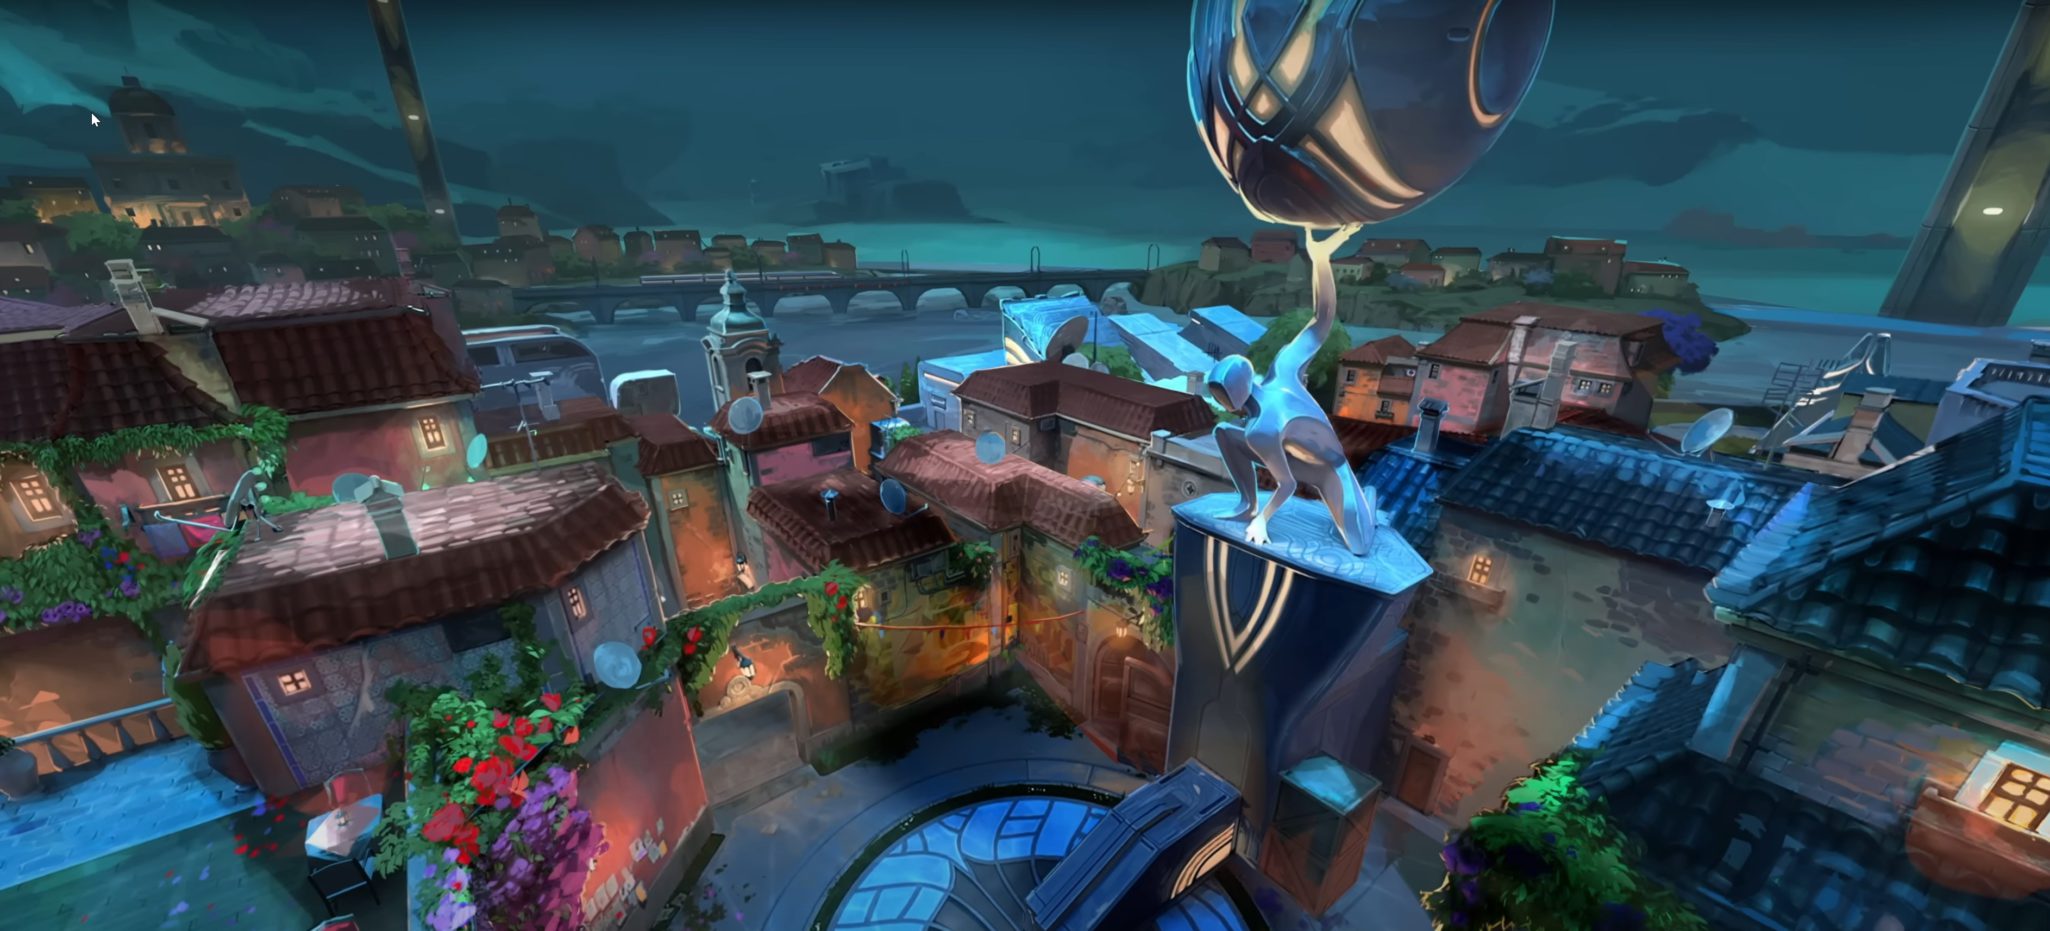 Valorant's New Map 'Pearl' Is an Atlantis-Inspired Underwater City